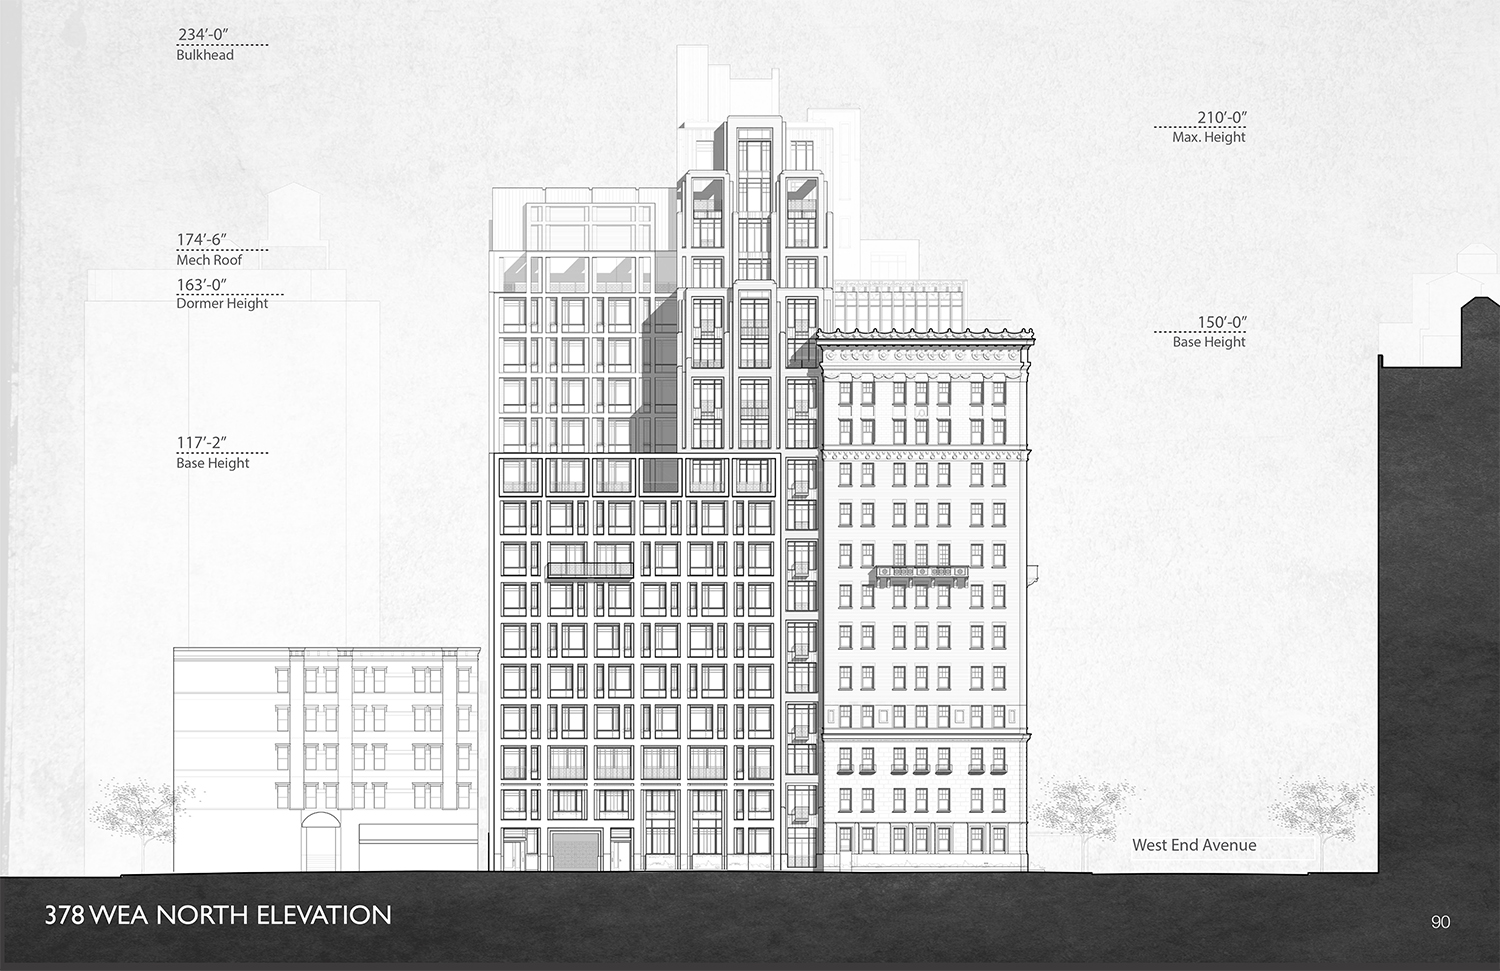 Proposed schematic of 378 West End Avenue.